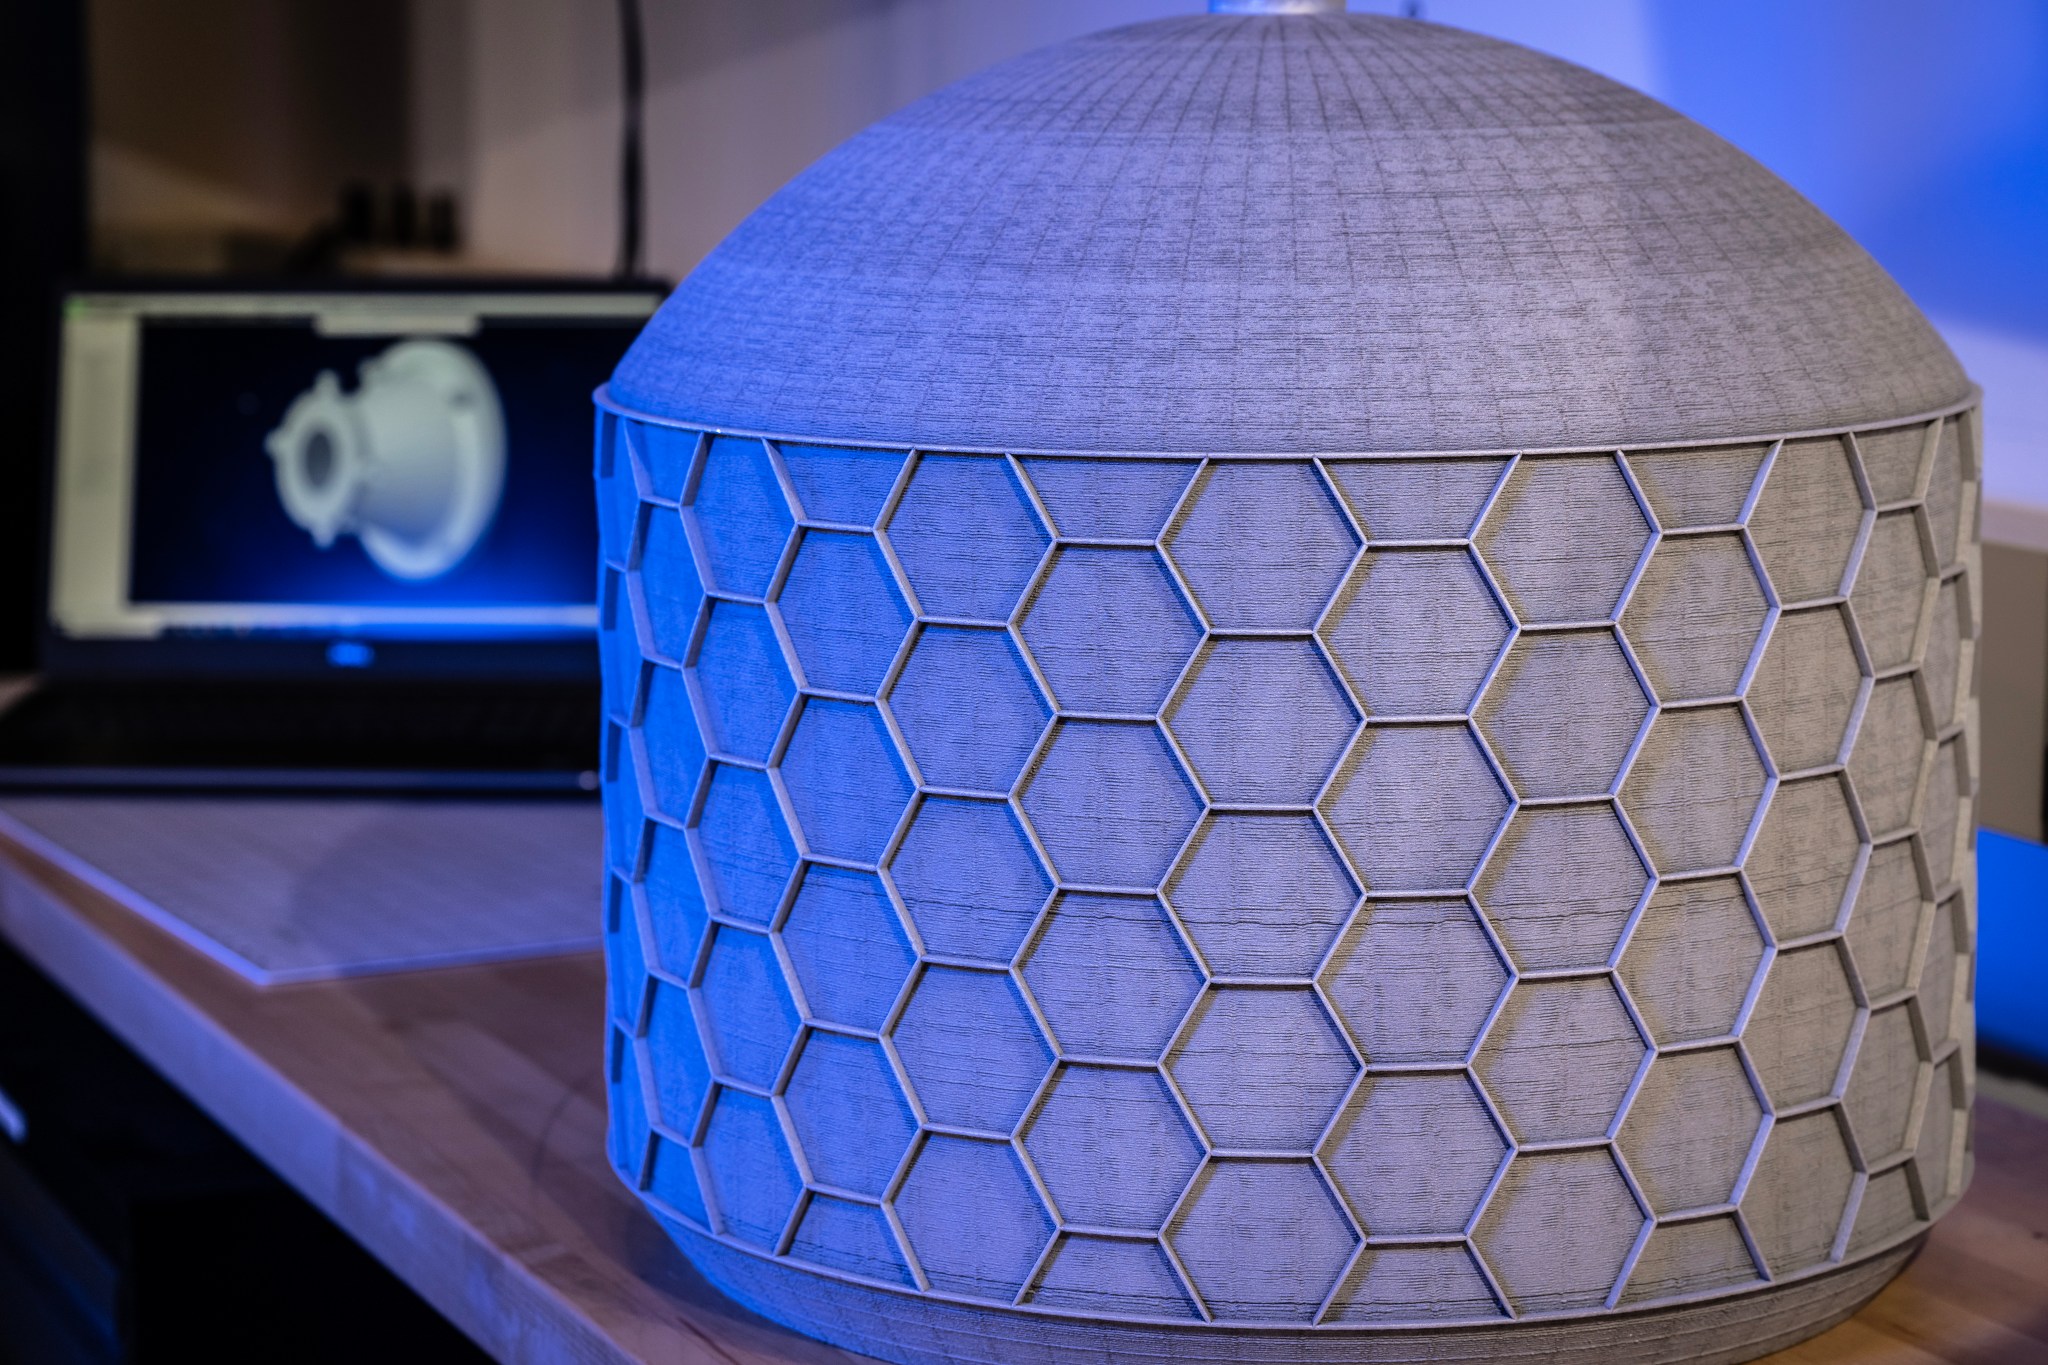 A 3D printed circular demonstrator tank is shown on a table in a blue light